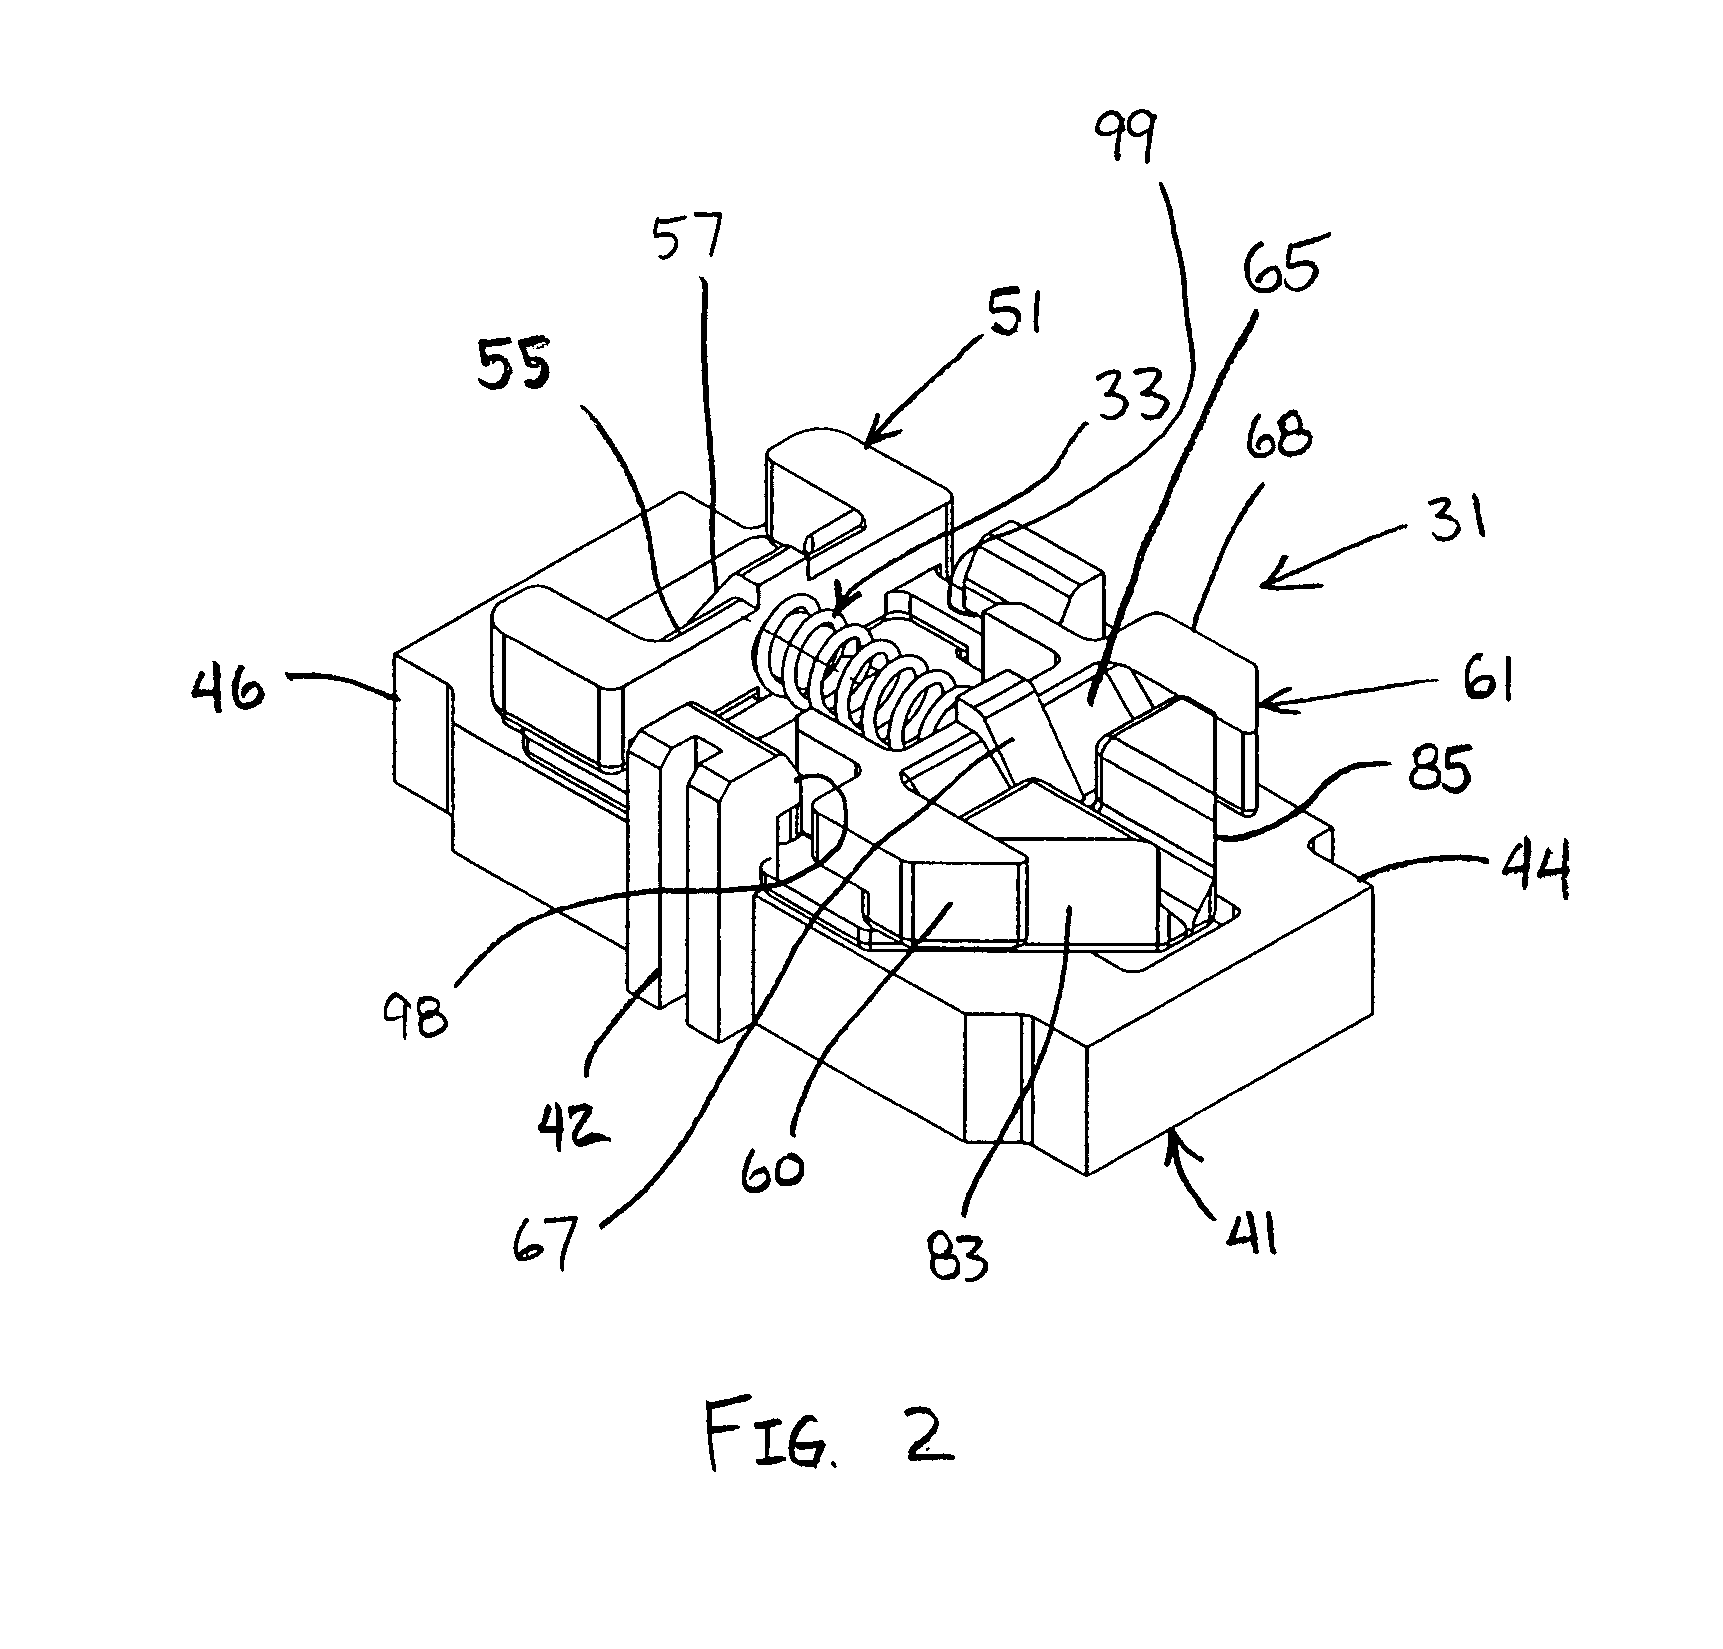 Tamper resistant assembly for an electrical receptacle